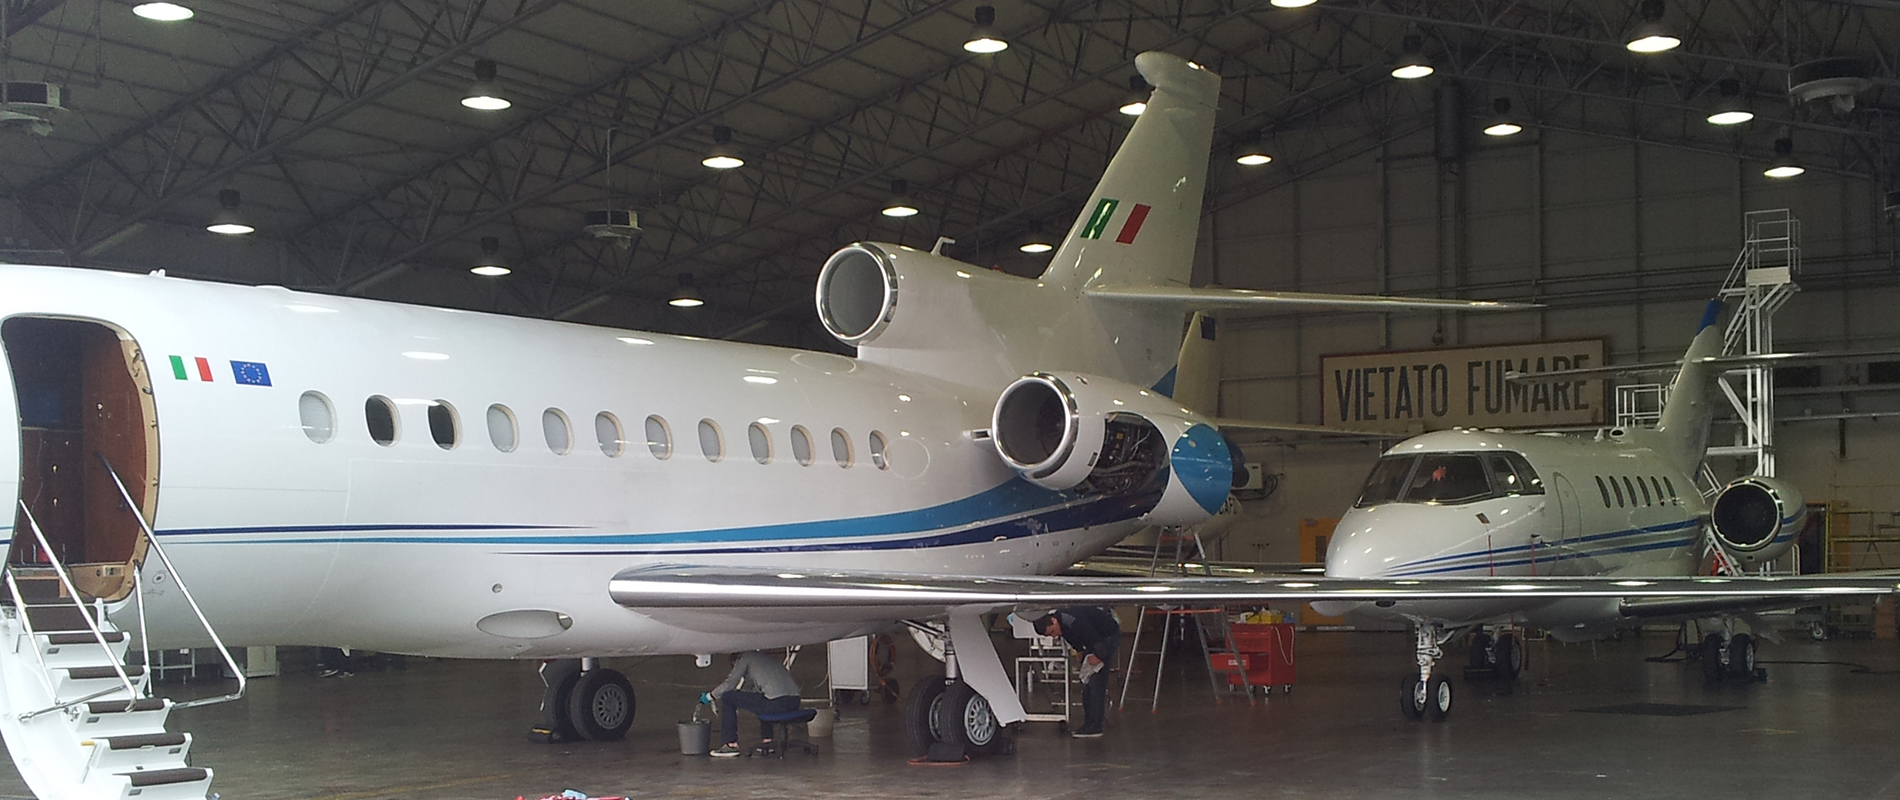 Aliserio is also approved by EASA to perform maintenance on a large range of business aircraft